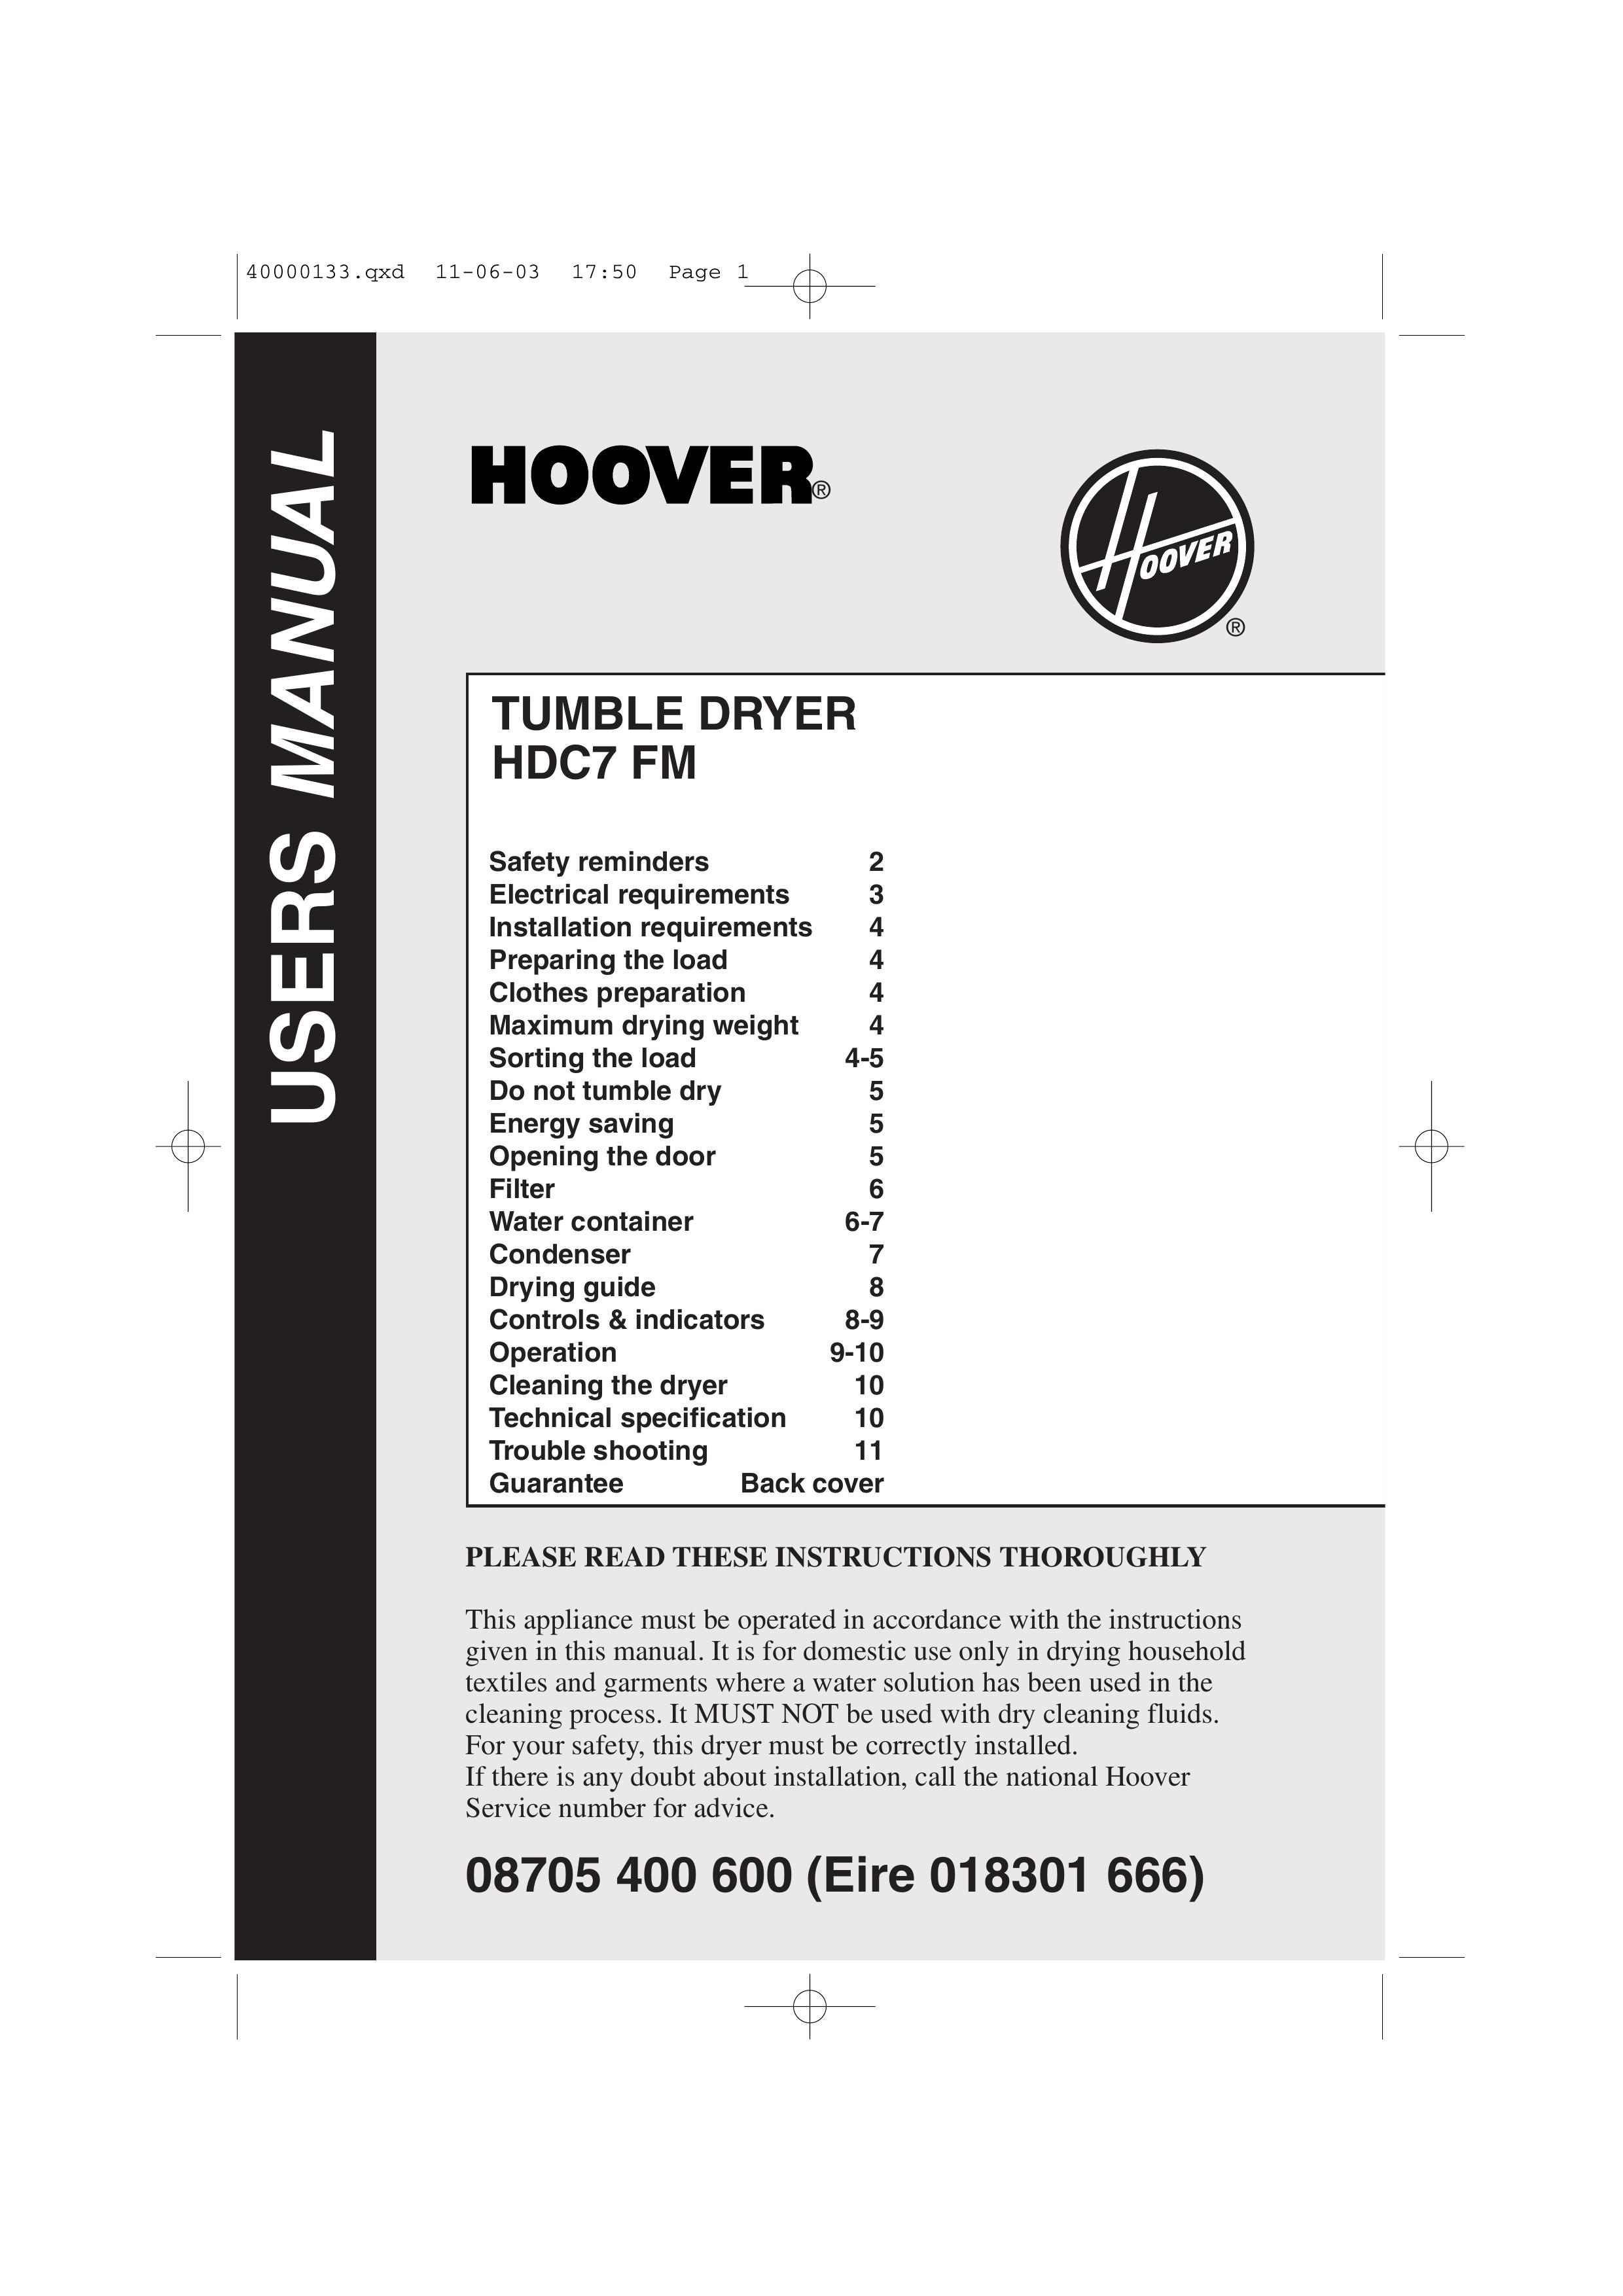 Hoover HDC7 FM Clothes Dryer User Manual